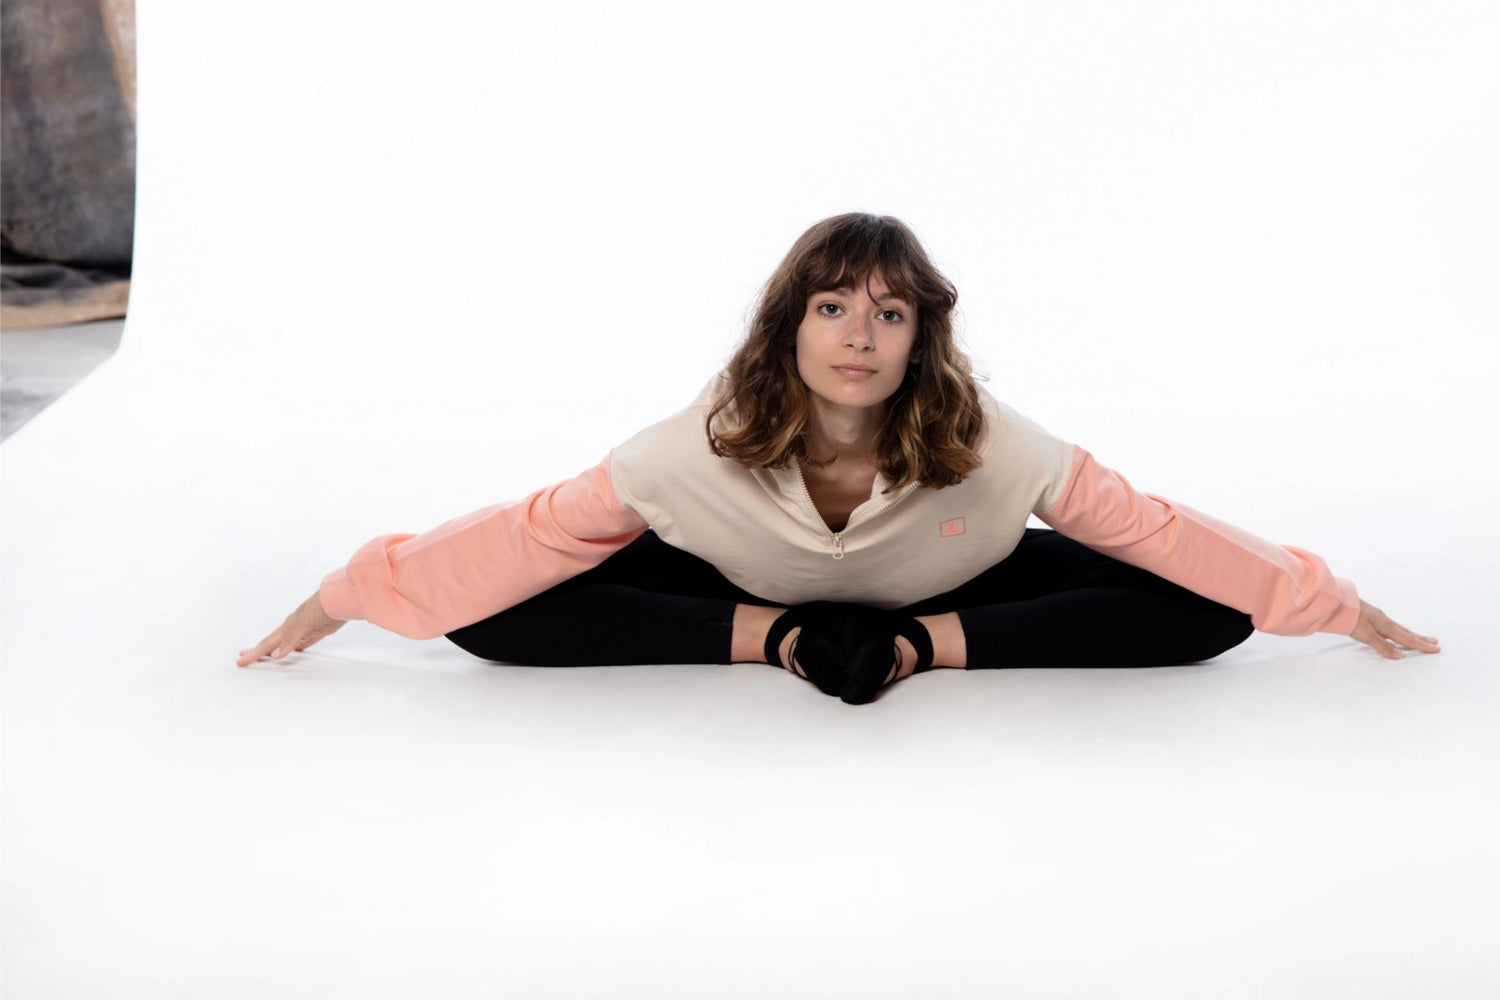 Woman sitting on floor in a yoga position wearing a pink hoodie and black leggings